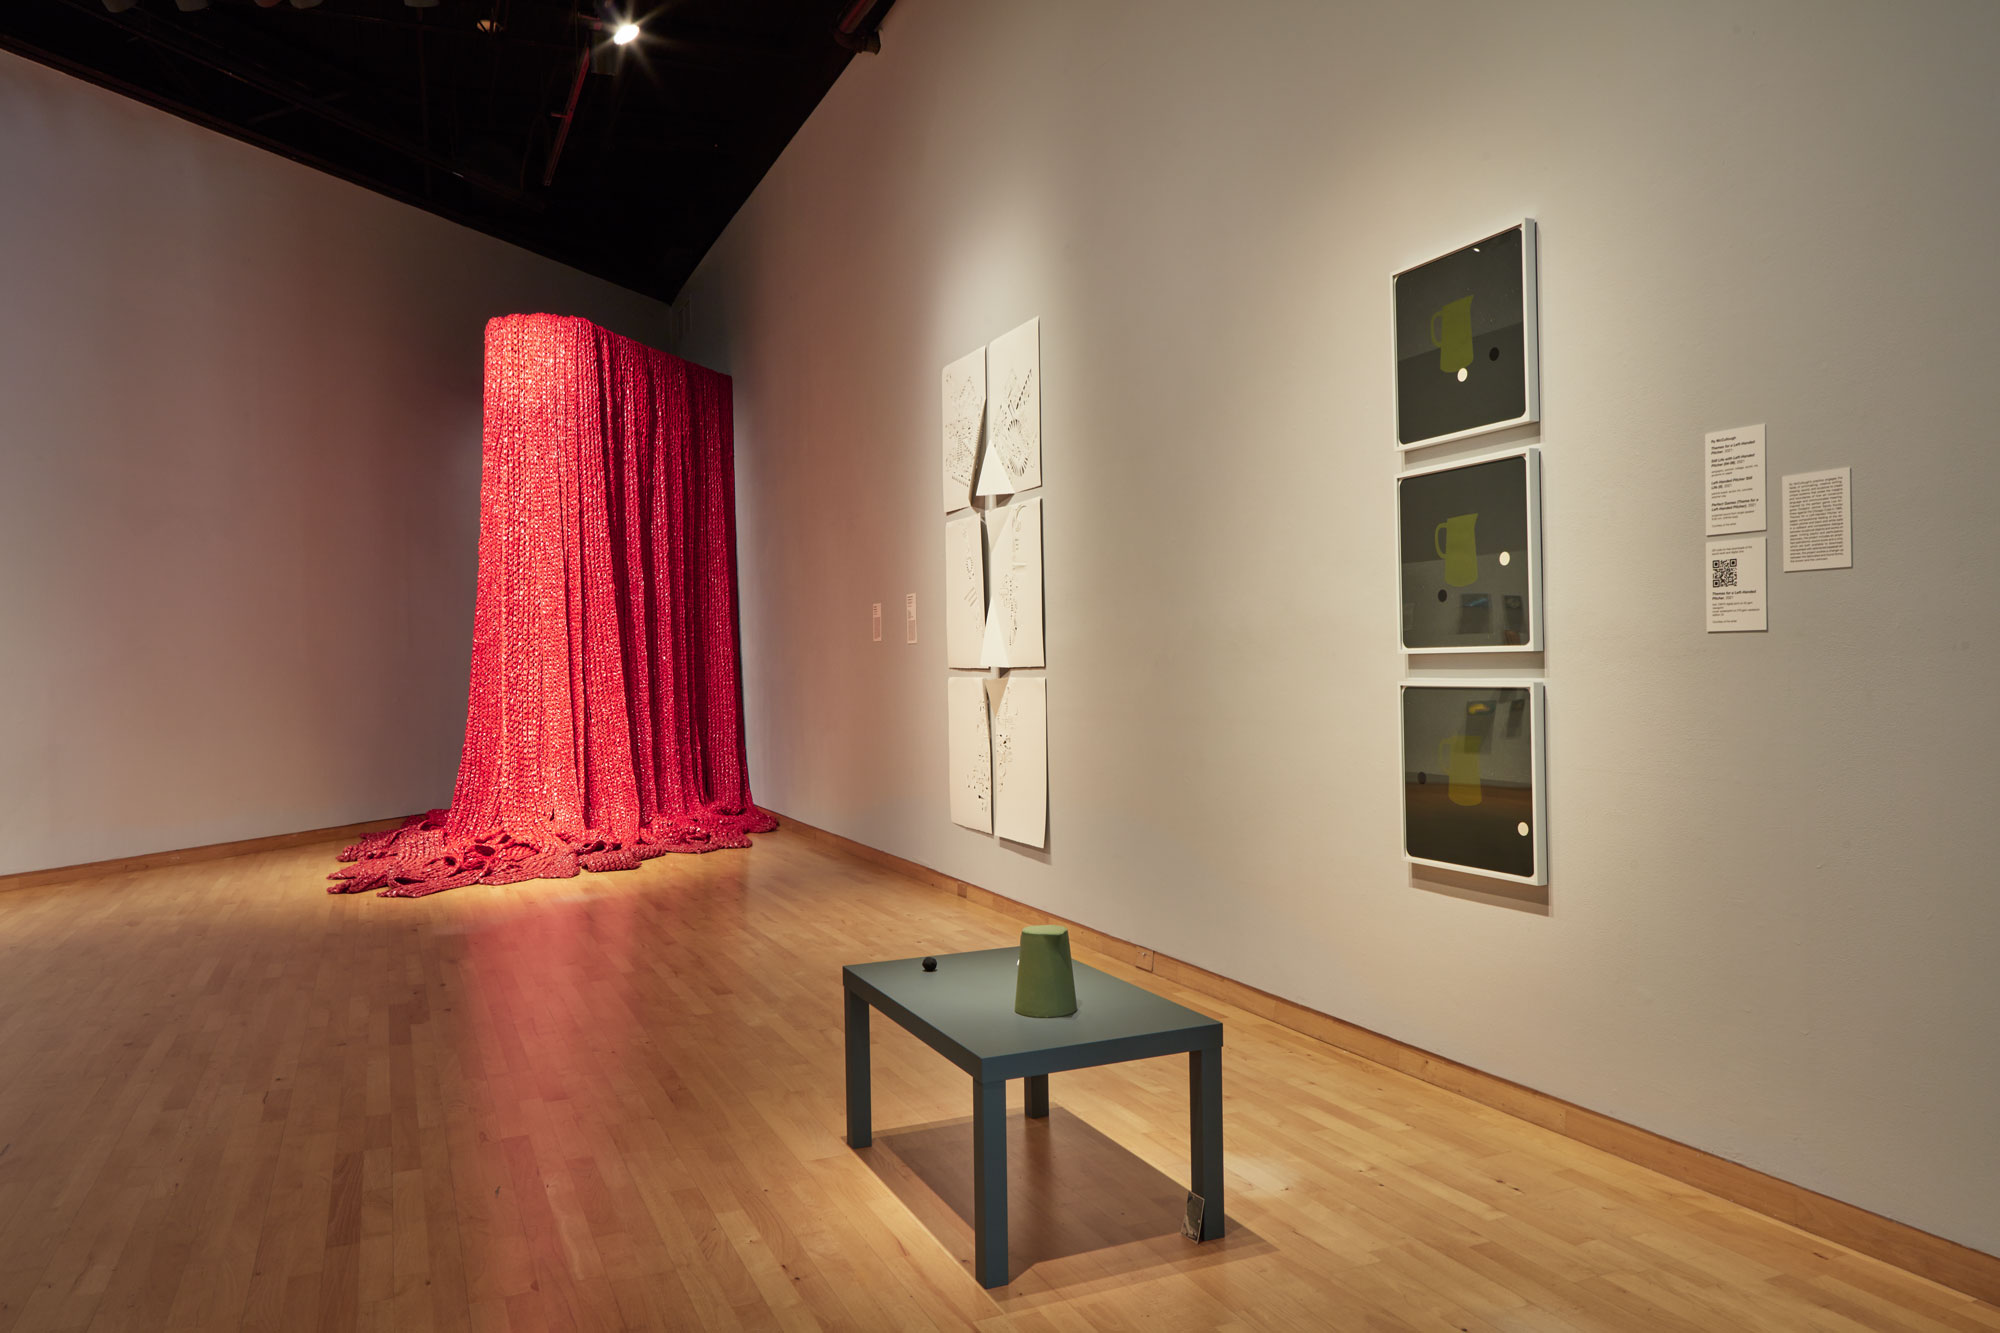 Installation view of Skyway 20/21 exhibition at USF Contemporary Art Museum. Left to right: works by Akiko Kotani, Rosemarie Chiarlone, and Ry McCollough. Photo: Will Lytch.